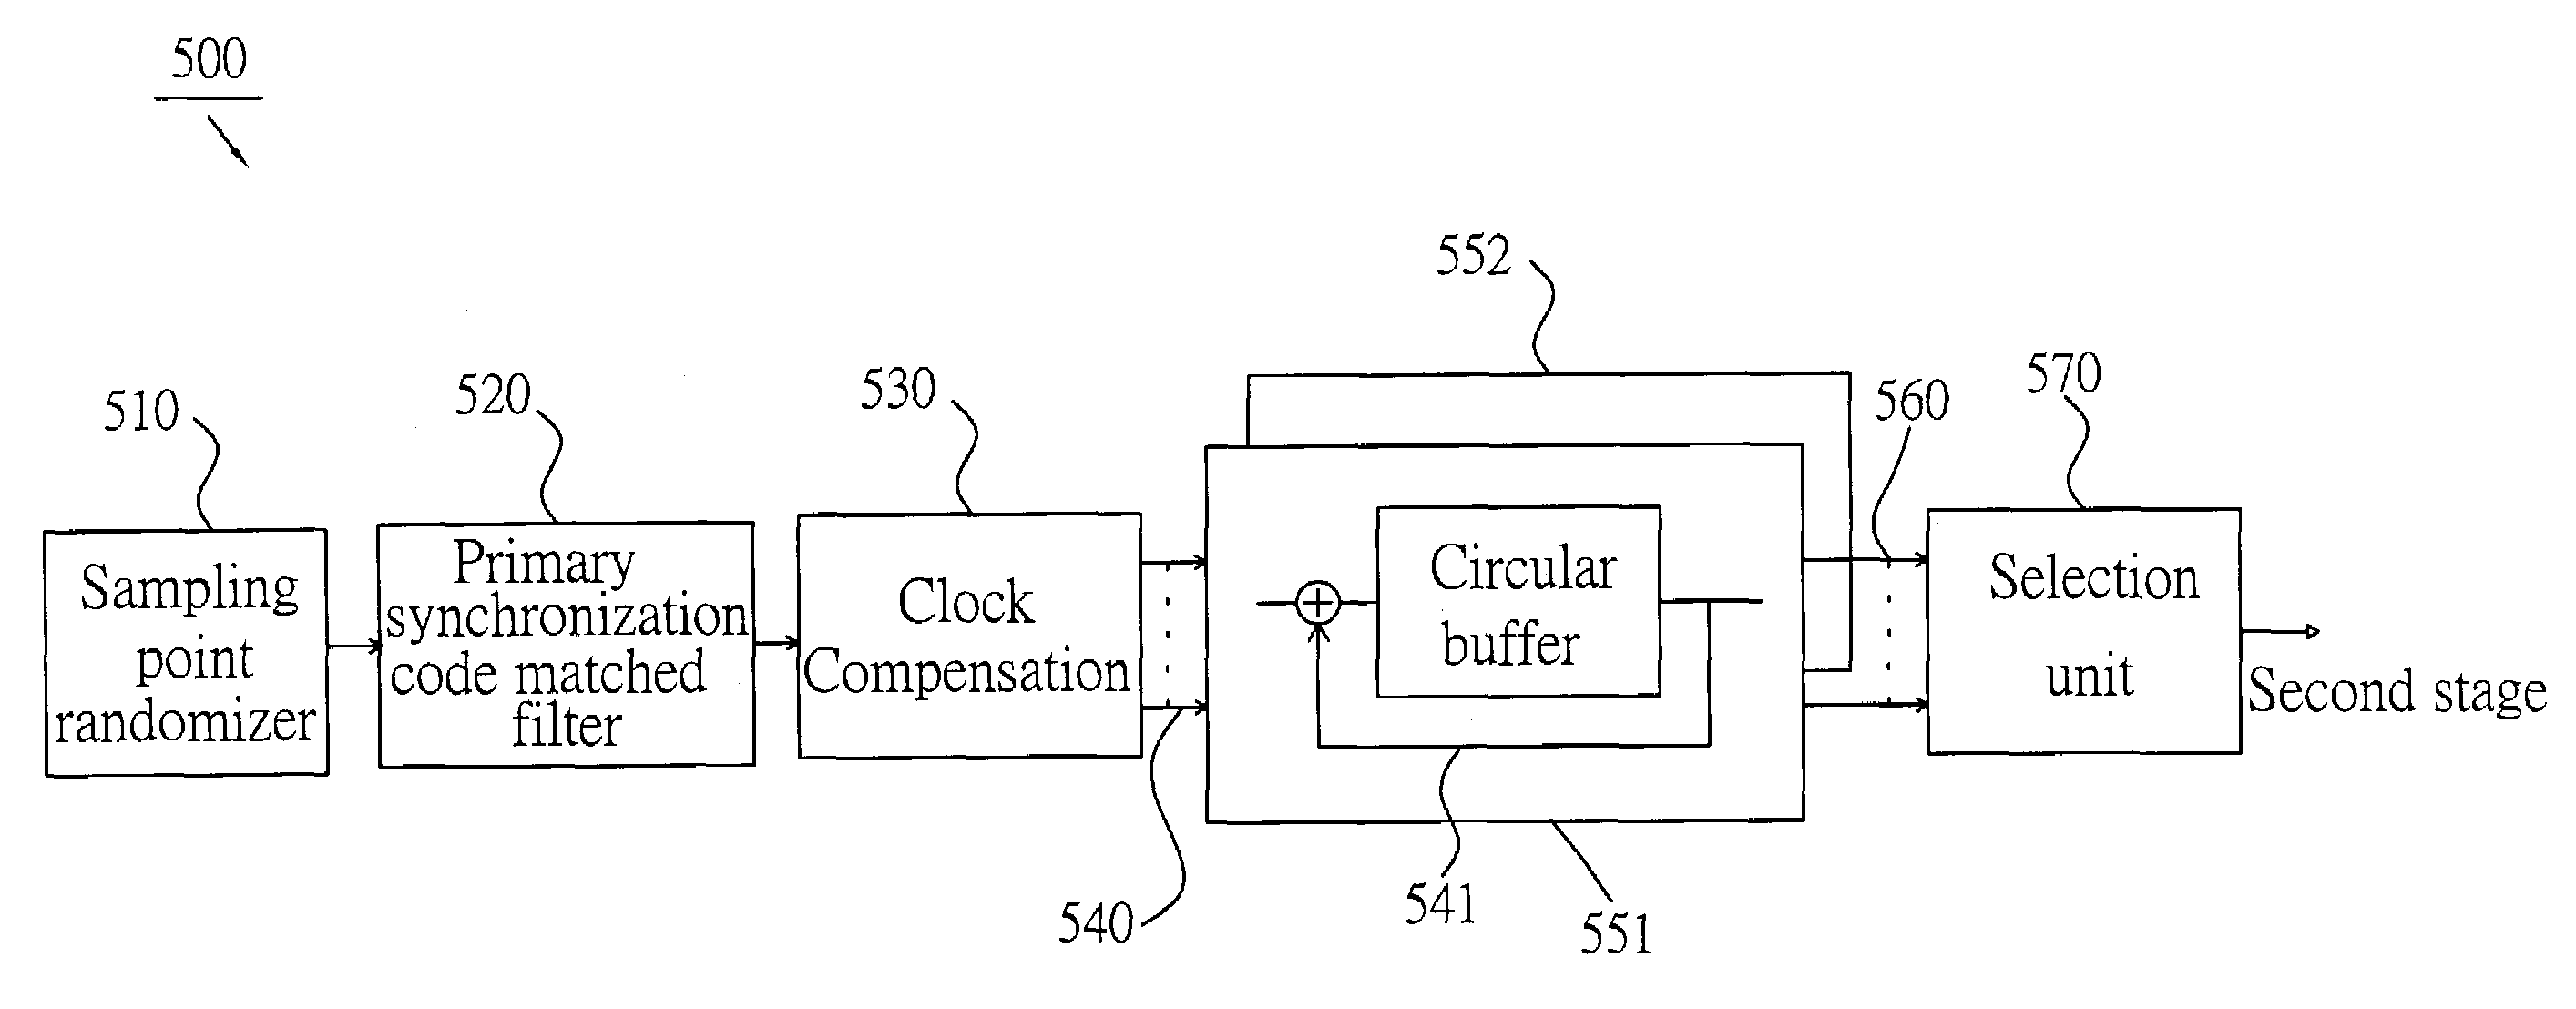 Synchronization code detecting apparatus for cell search in a CDMA system